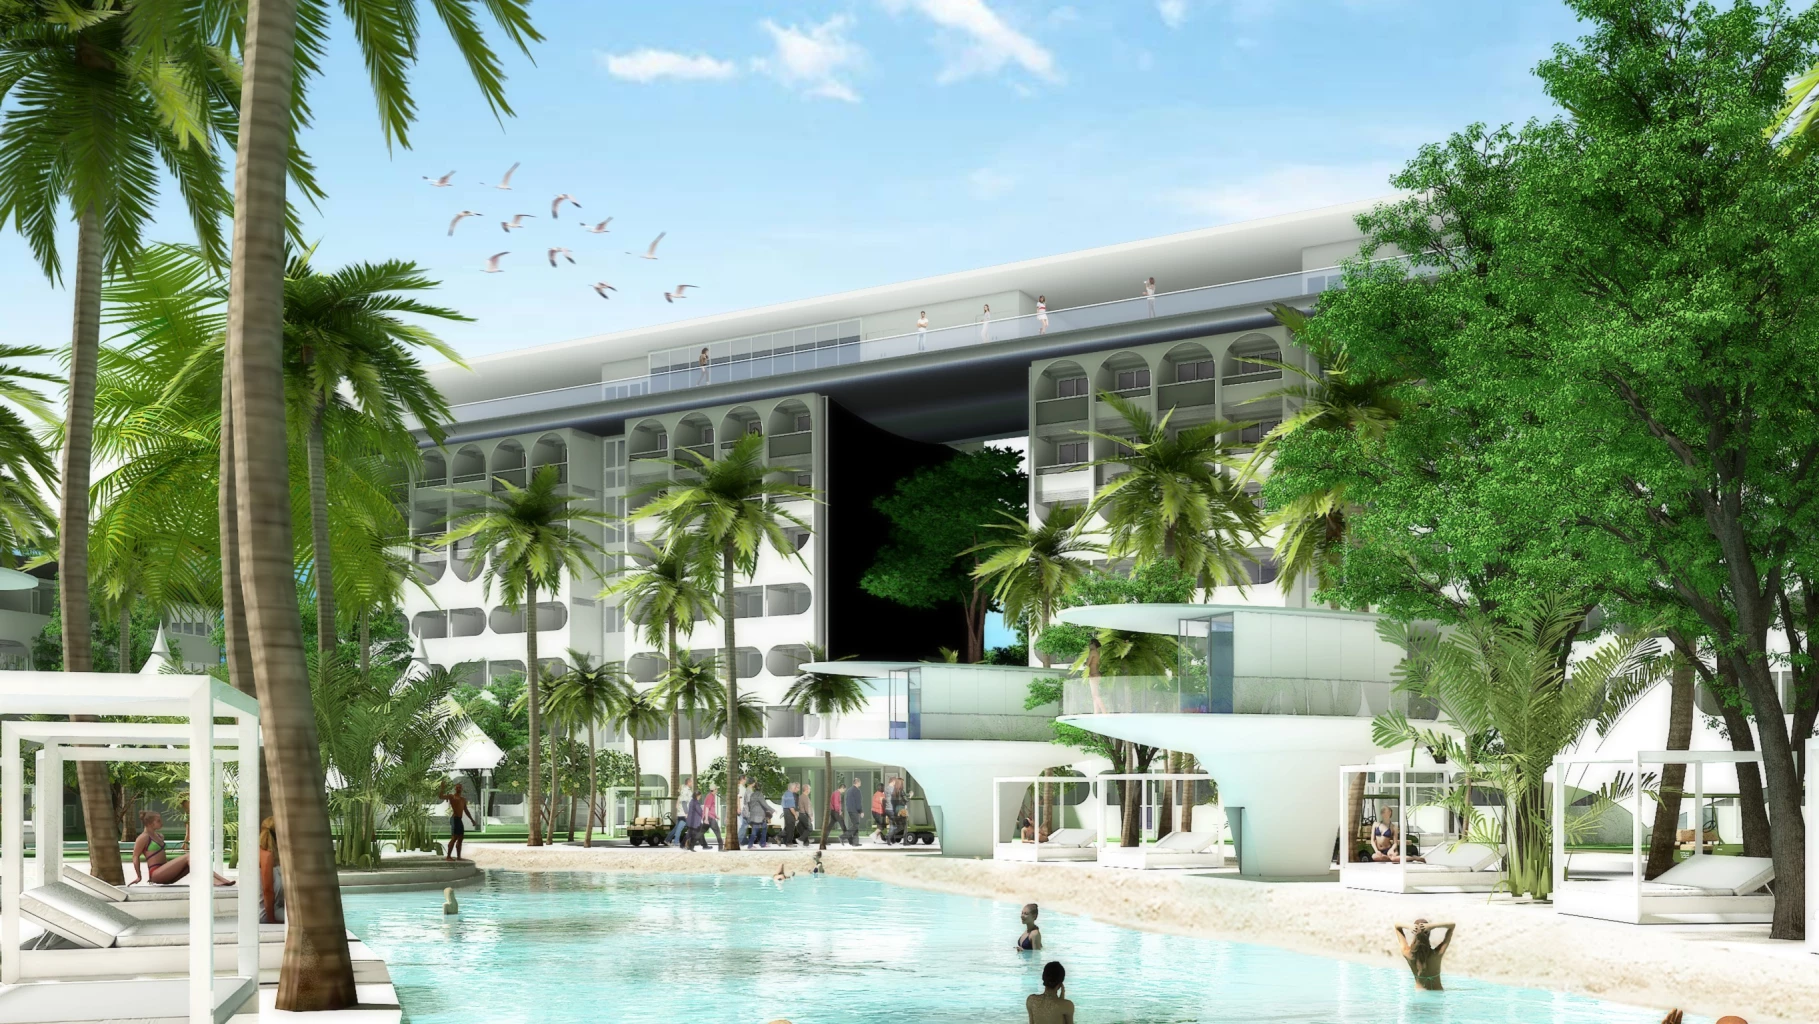 azure-rich-group-announces-new-resort-project-in-jomtien-beach-thailand-in-partnership-with-wyndham-hotels-resorts-nation-thailand Azure Rich Group announces new Resort Project in Jomtien Beach, Thailand in partnership with Wyndham Hotels & Resorts - Nation Thailand